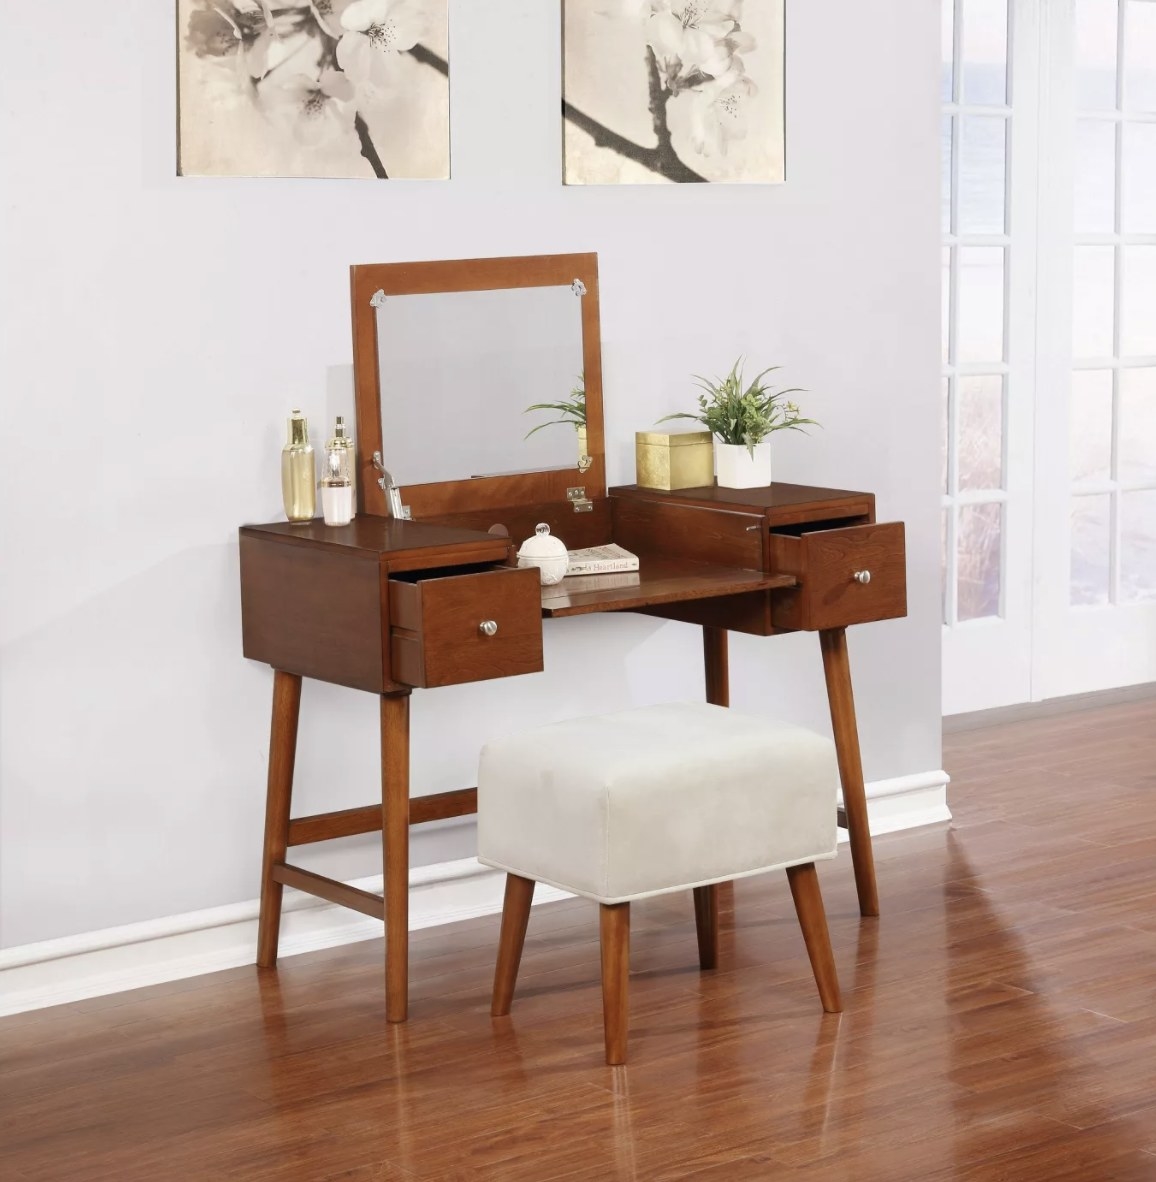 The rich brown vanity with silver handles has a white velvet stool and a flip top mirror